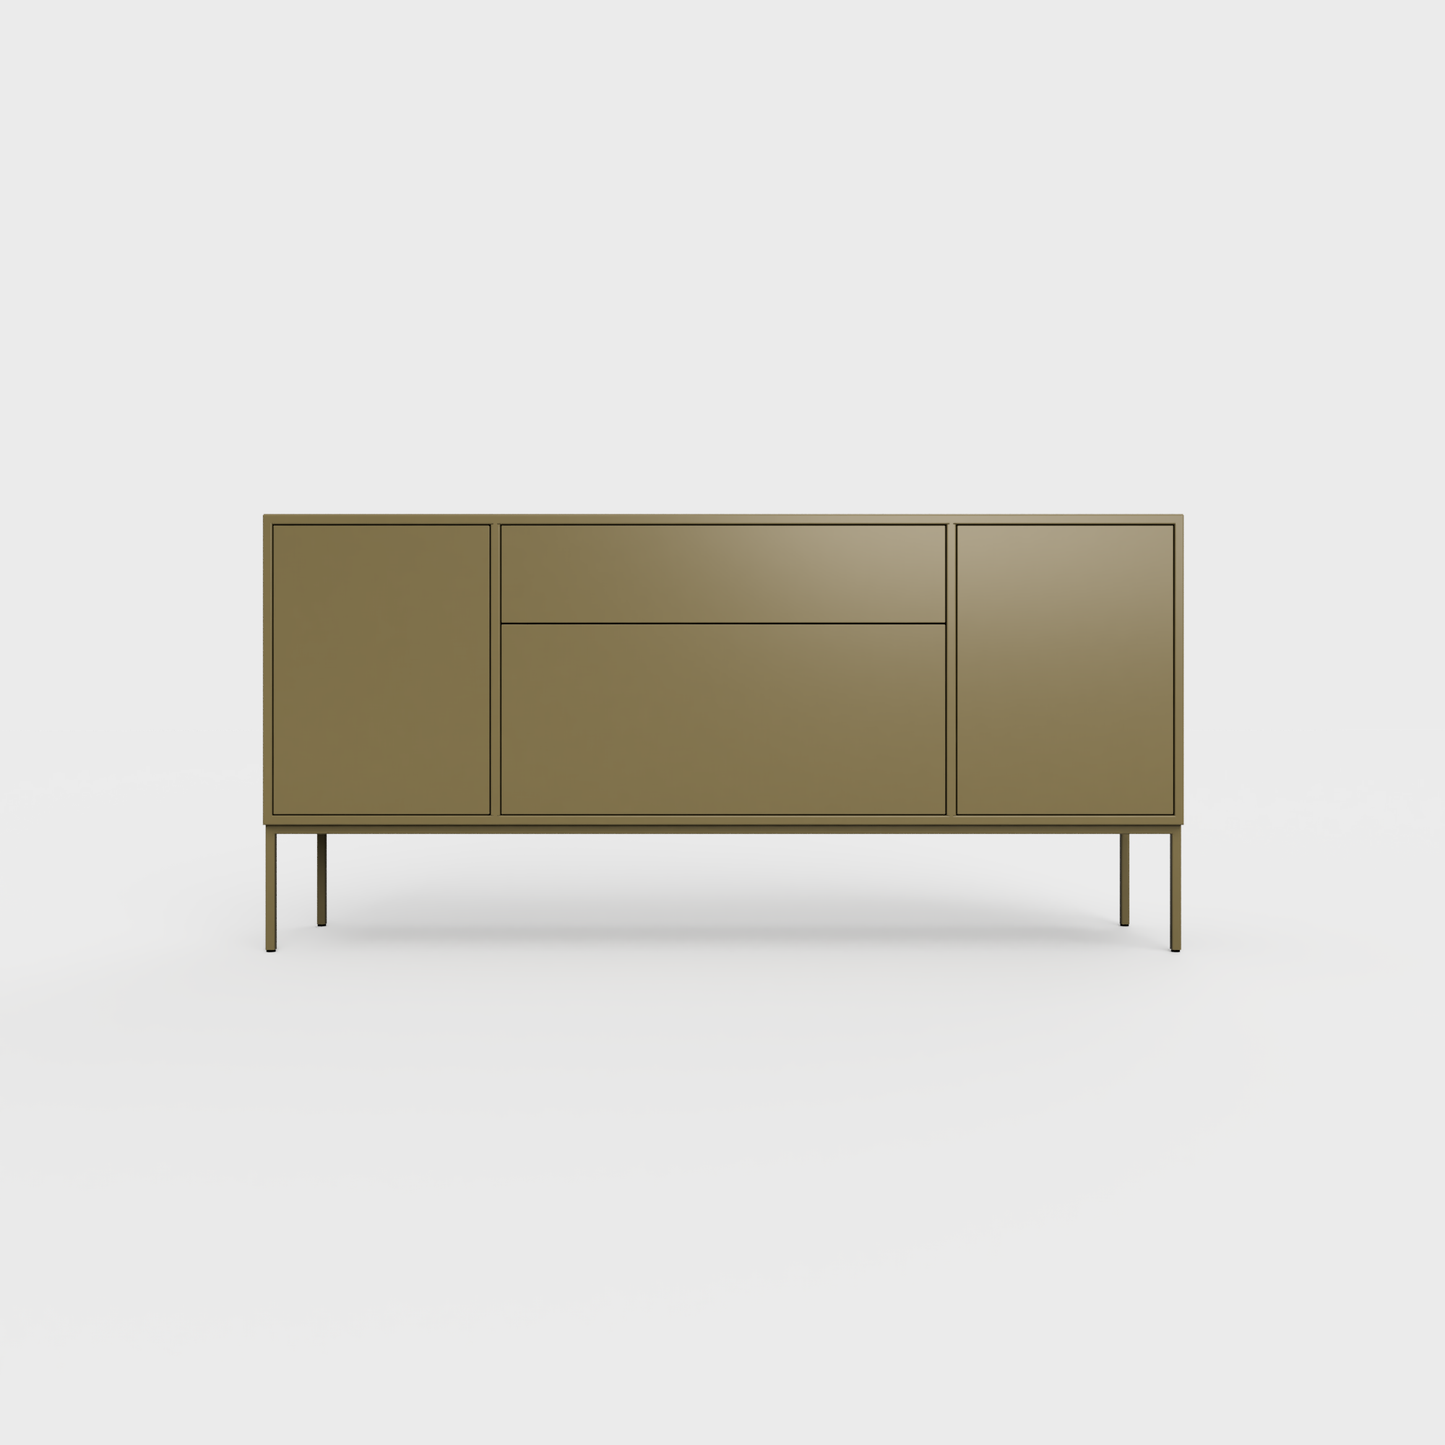 Arnika 02 Sideboard in Brown Olive color, powder-coated steel, elegant and modern piece of furniture for your living room